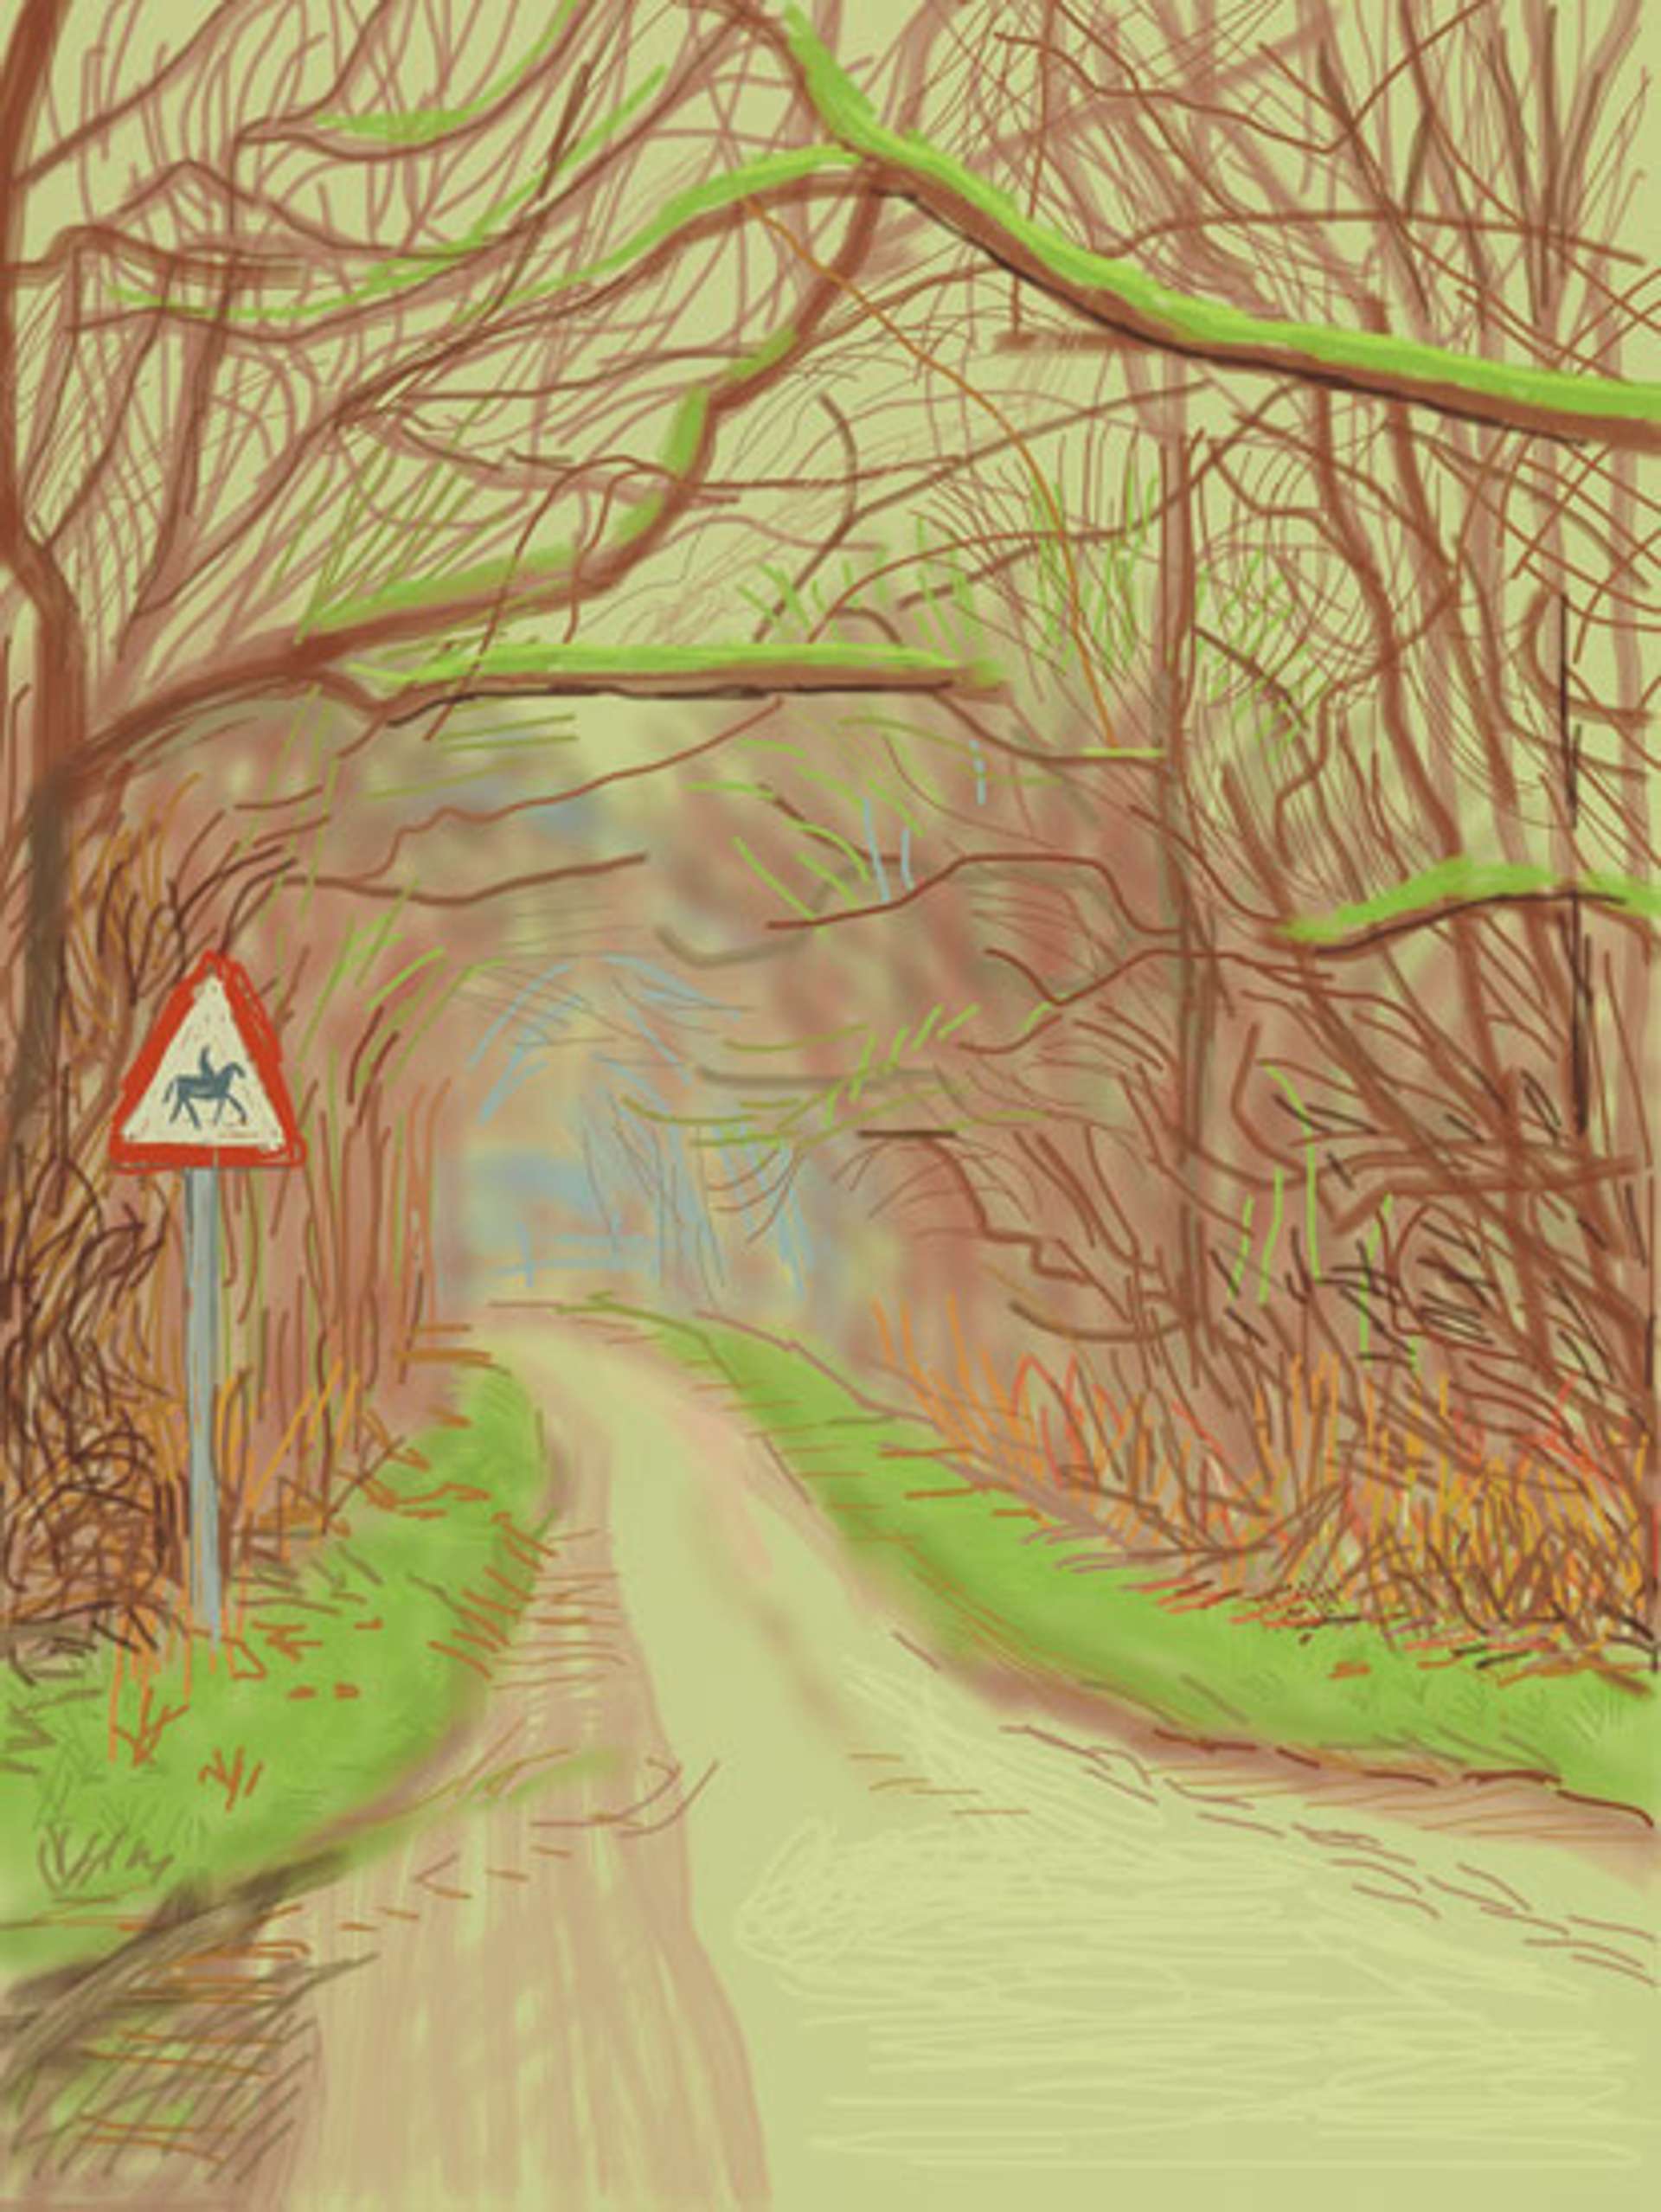 The Arrival Of Spring In Woldgate East Yorkshire 14th March 2011 - Signed Print by David Hockney 2011 - MyArtBroker